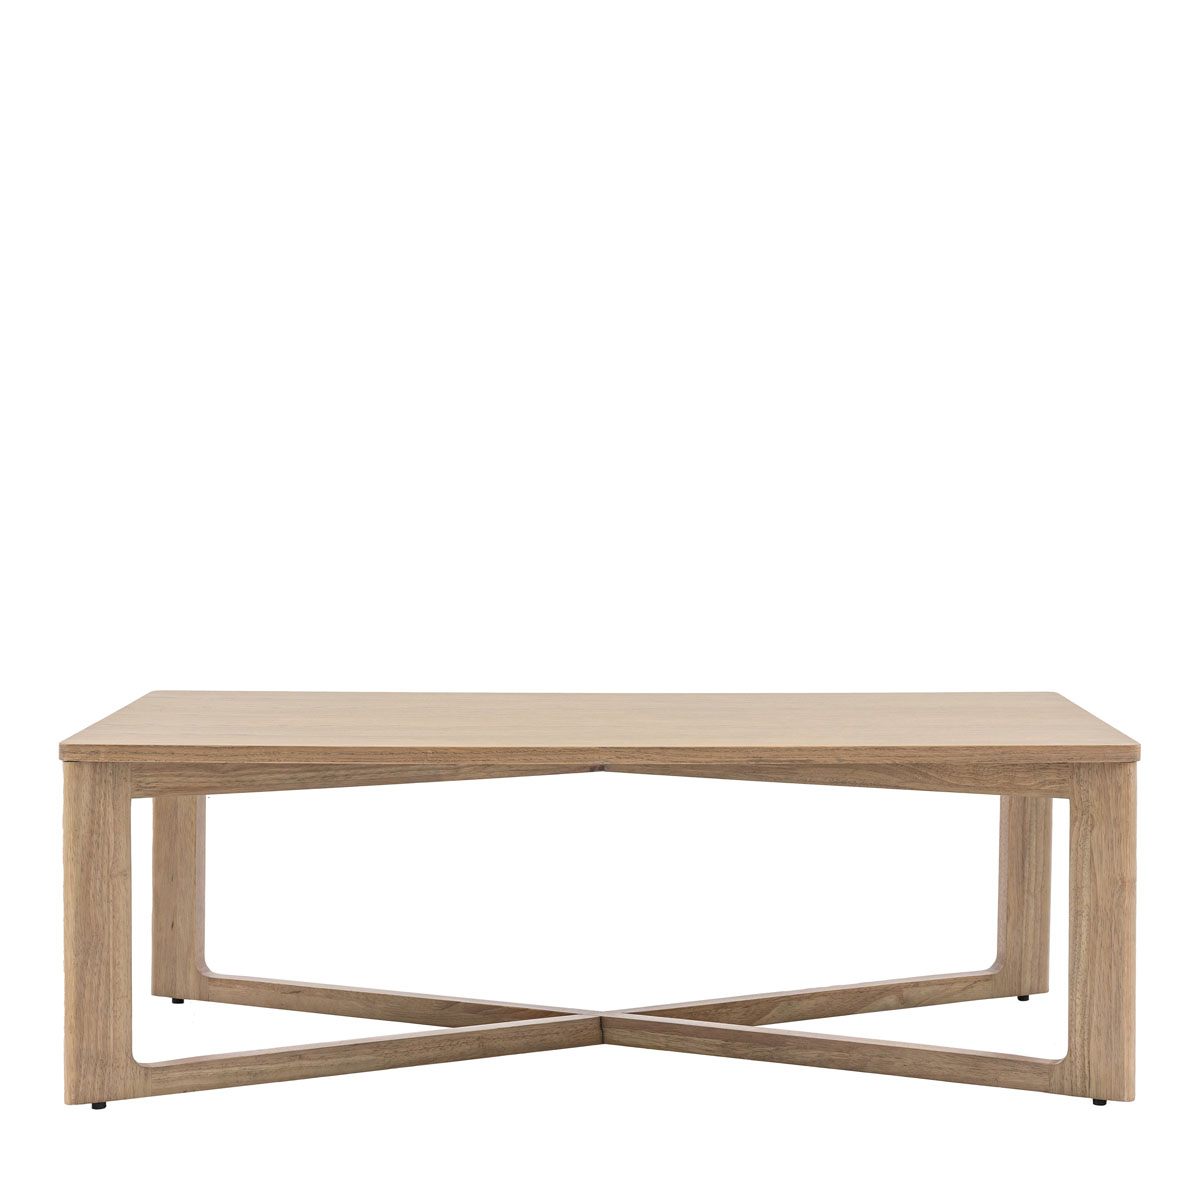 Panelled Coffee Table 1200x550x400mm